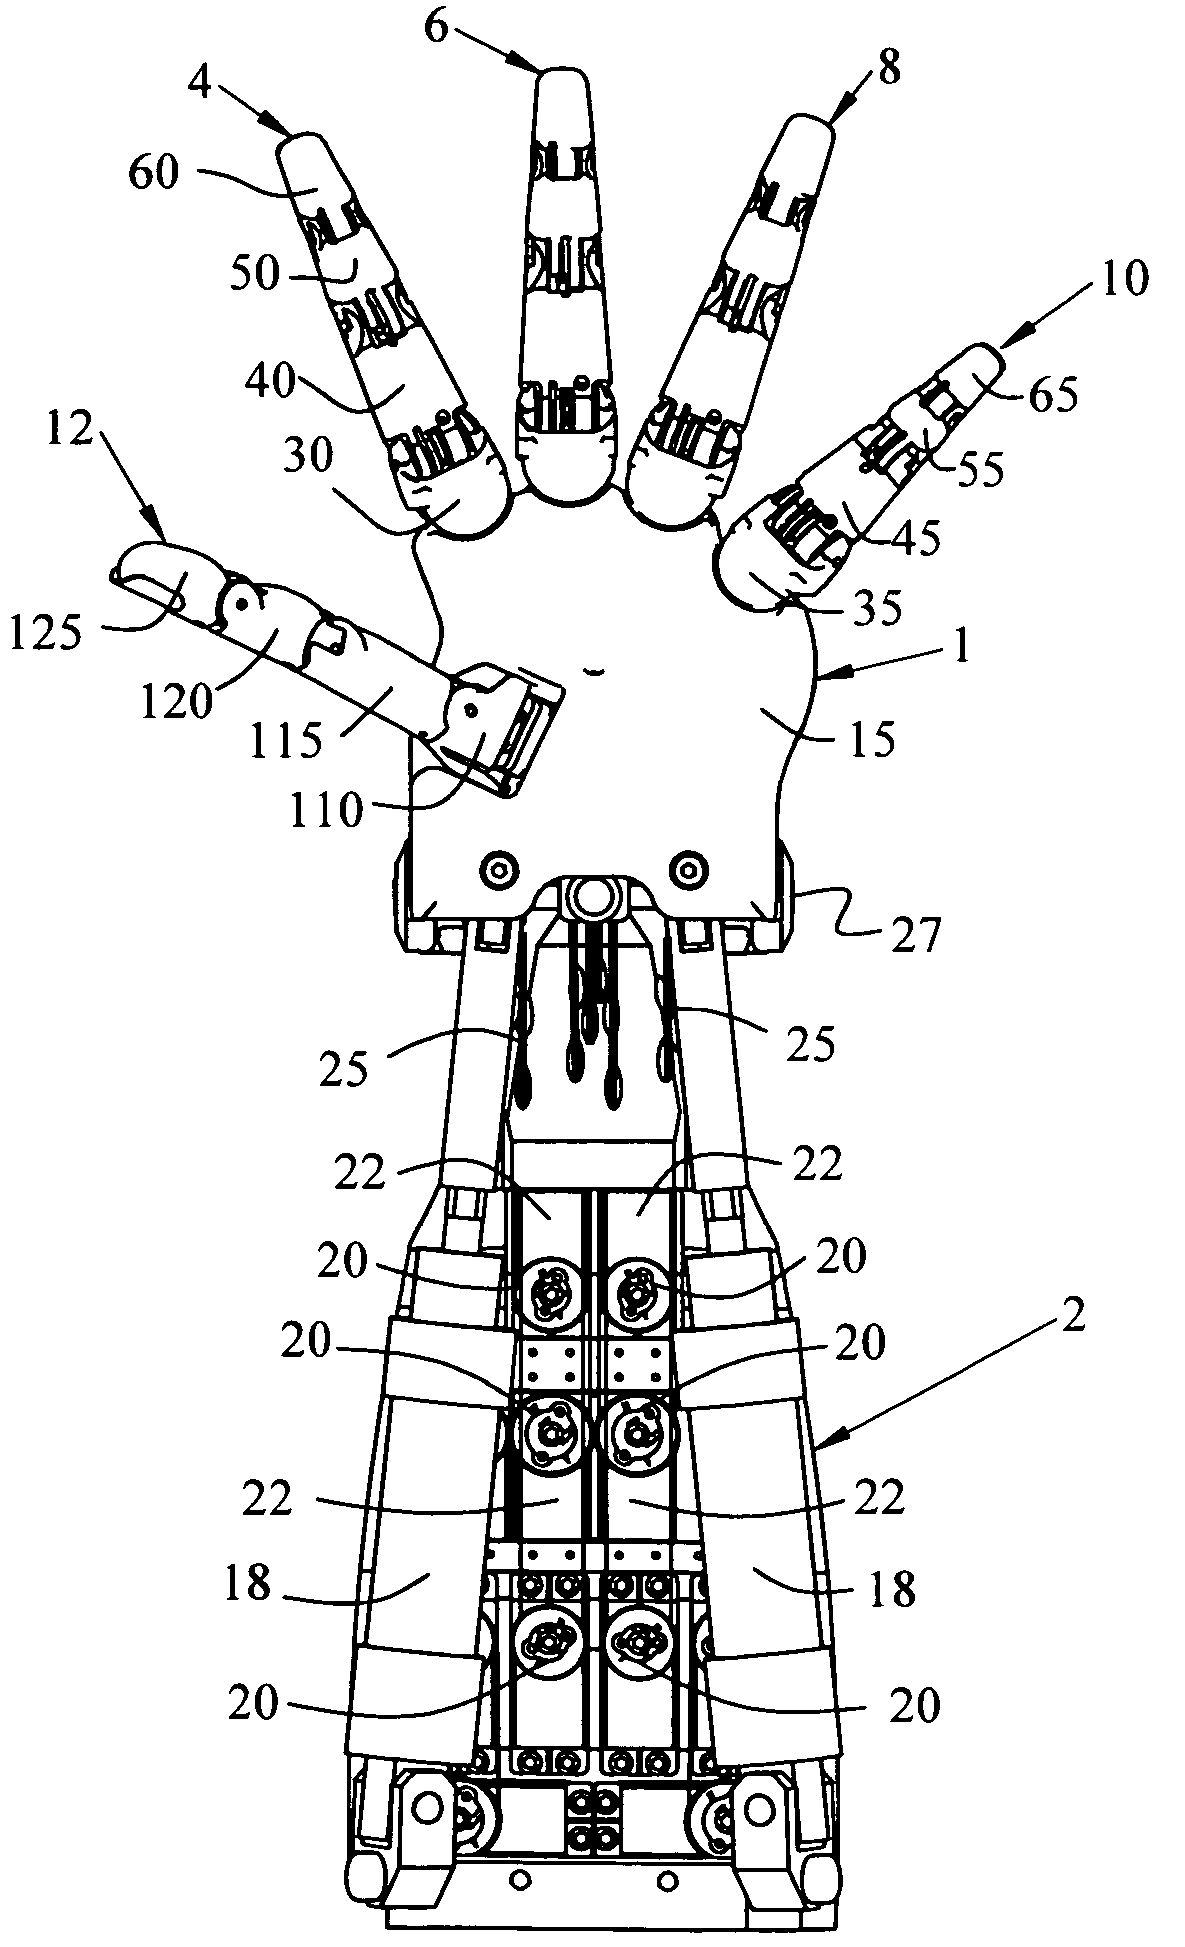 Robotic hand and arm apparatus